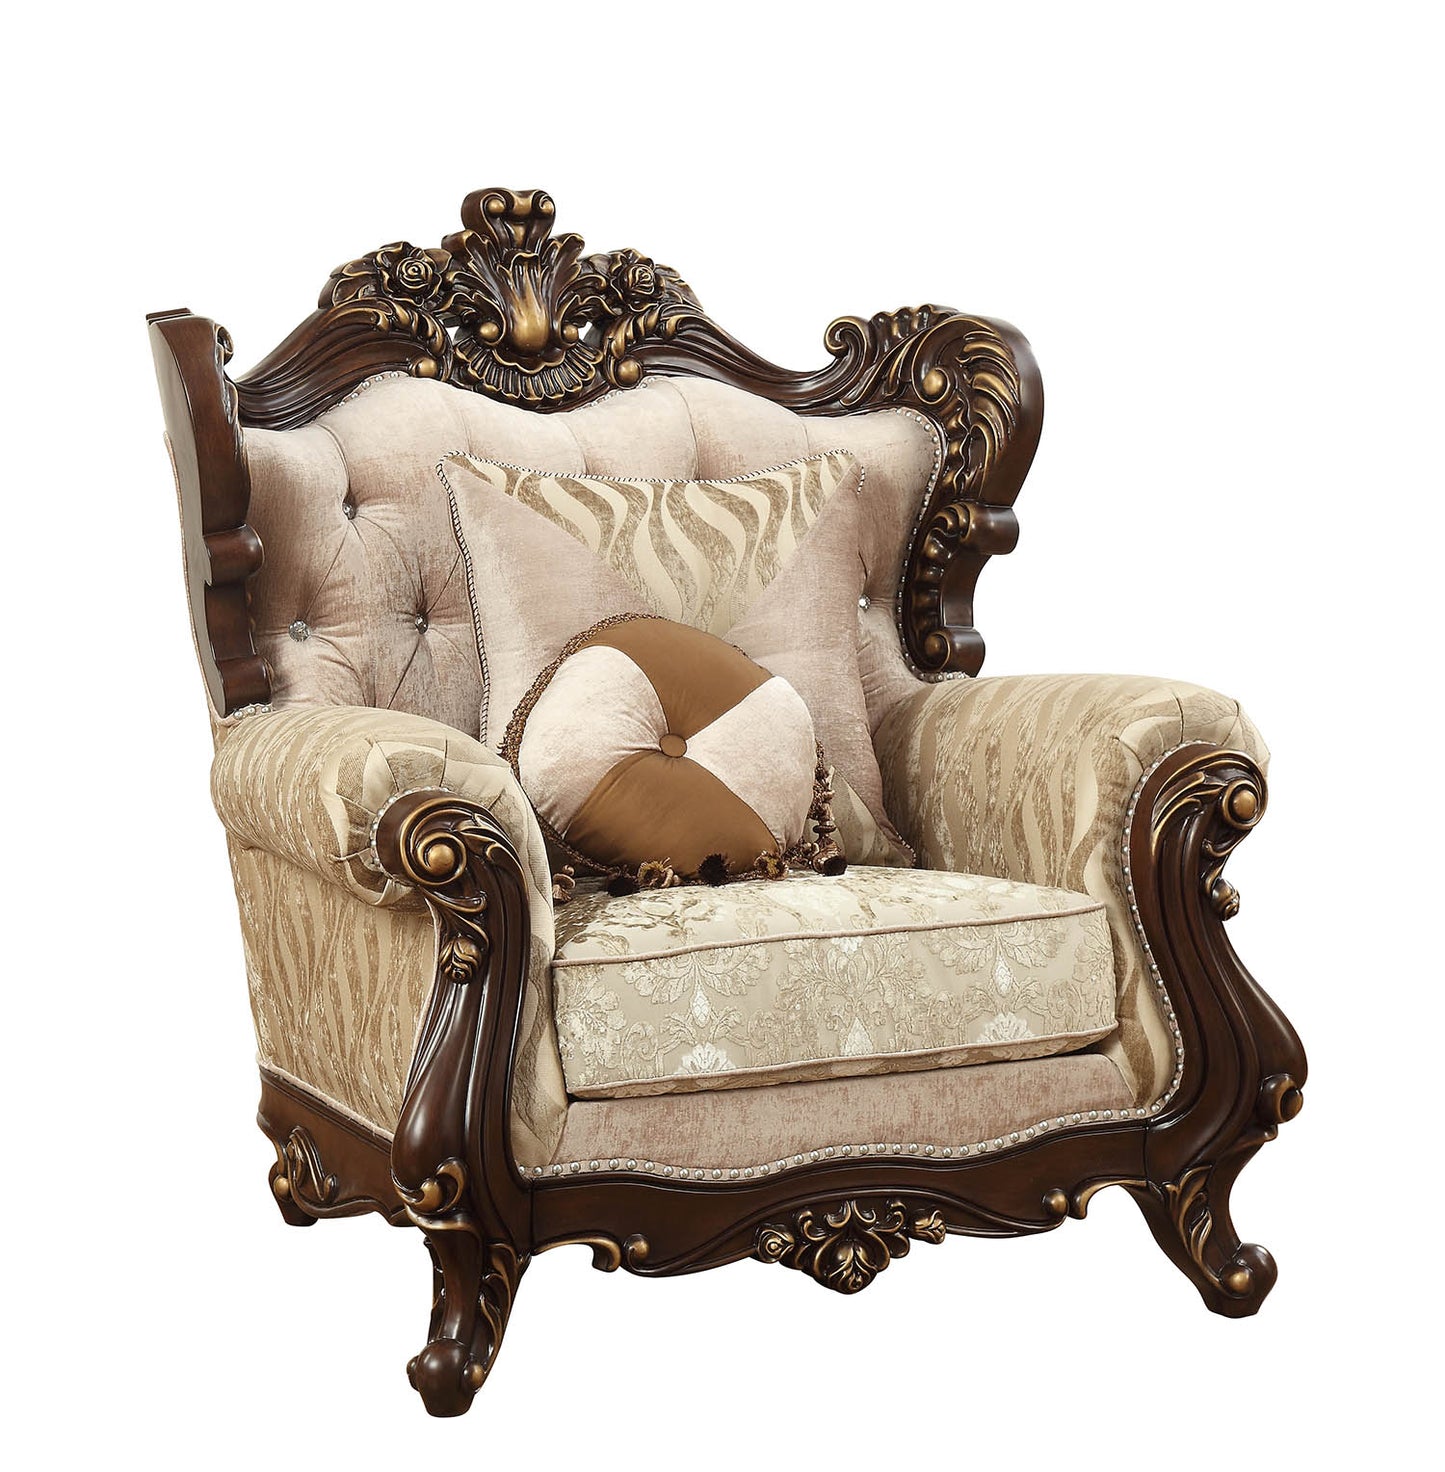 36" Beige And Brown Fabric Damask Tufted Chesterfield Chair